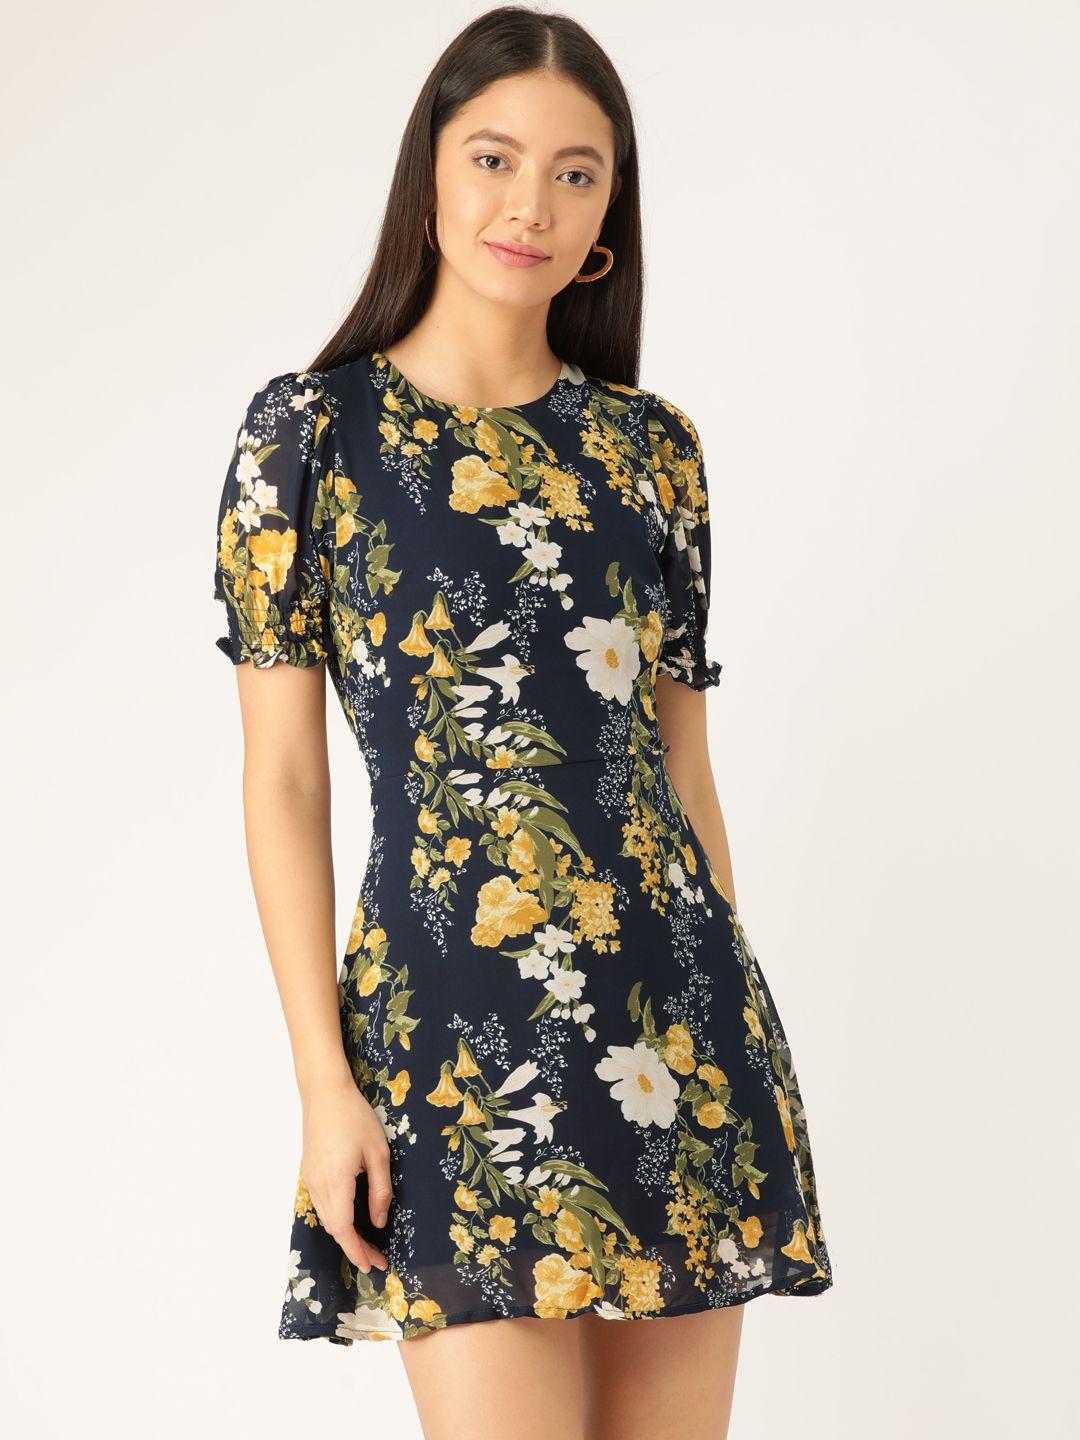 anvi be yourself women navy blue & yellow floral printed semi-sheer a-line dress